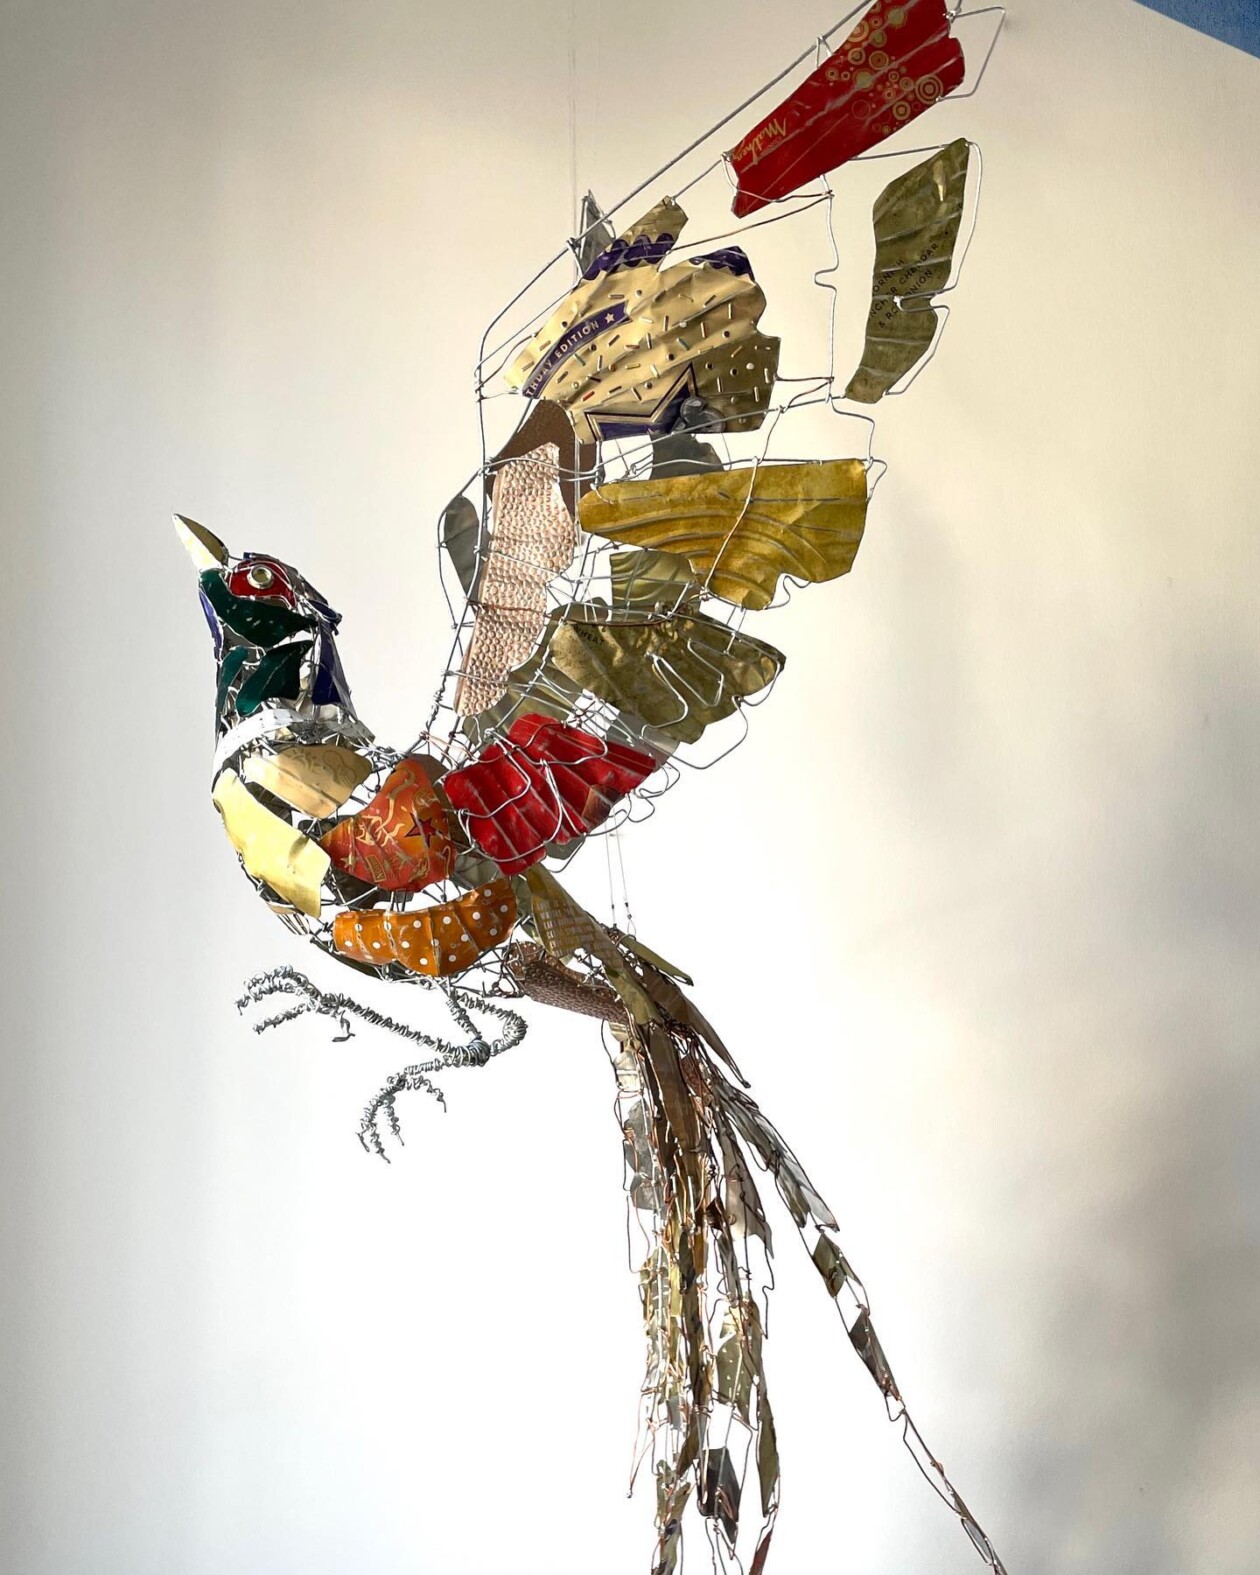 Bird Sculptures Made From Recycled Metal Scraps By Barbara Franc (11)